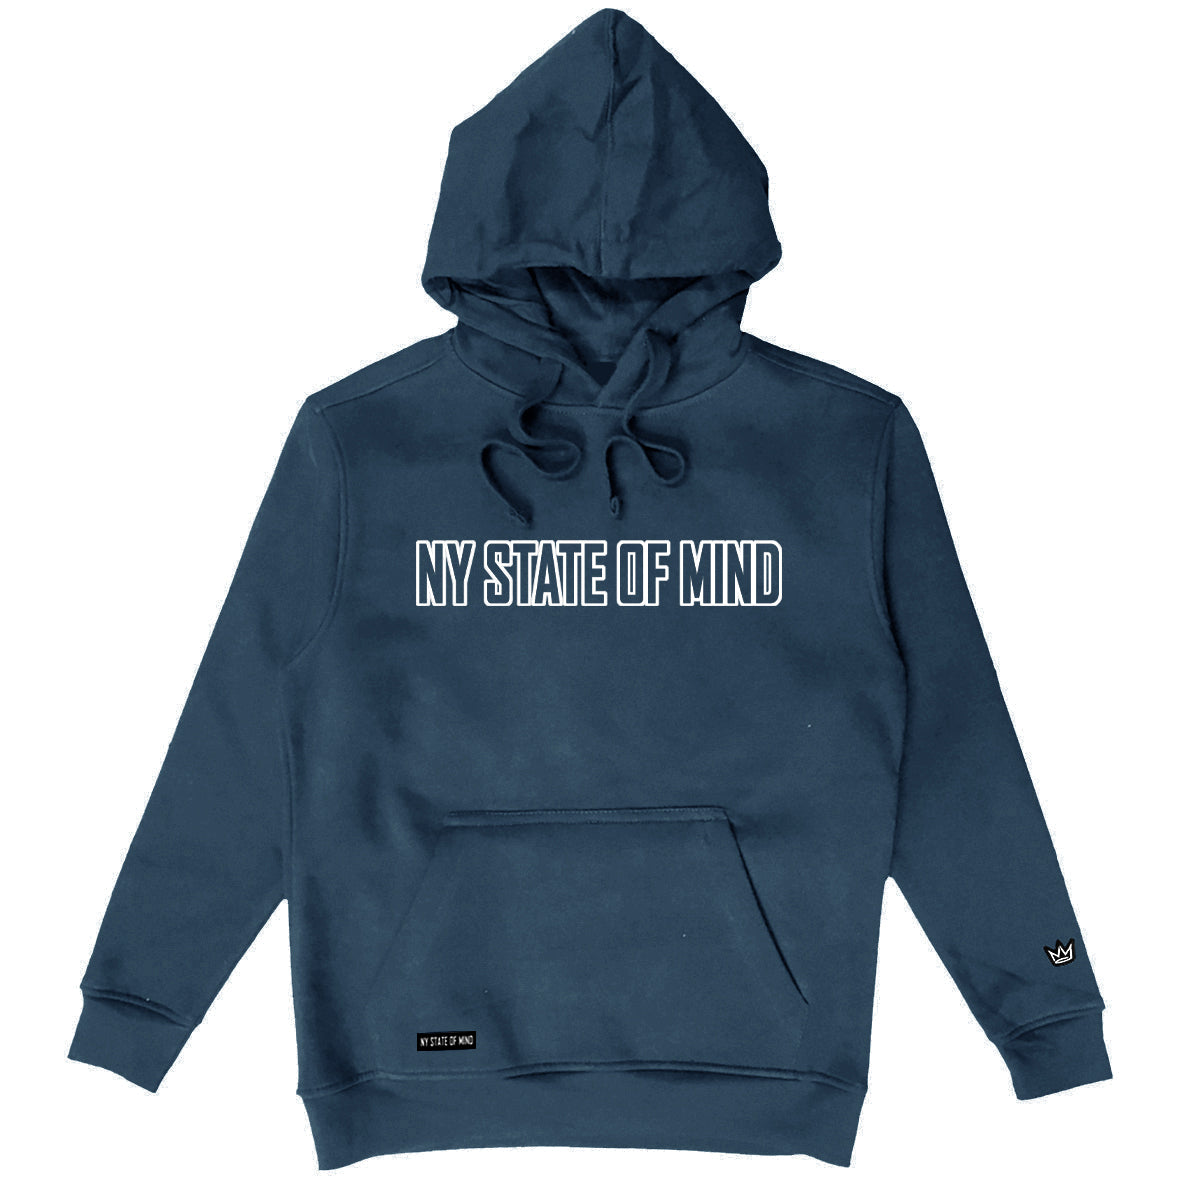 Outline Hooded Sweatshirt by NY State of Mind?